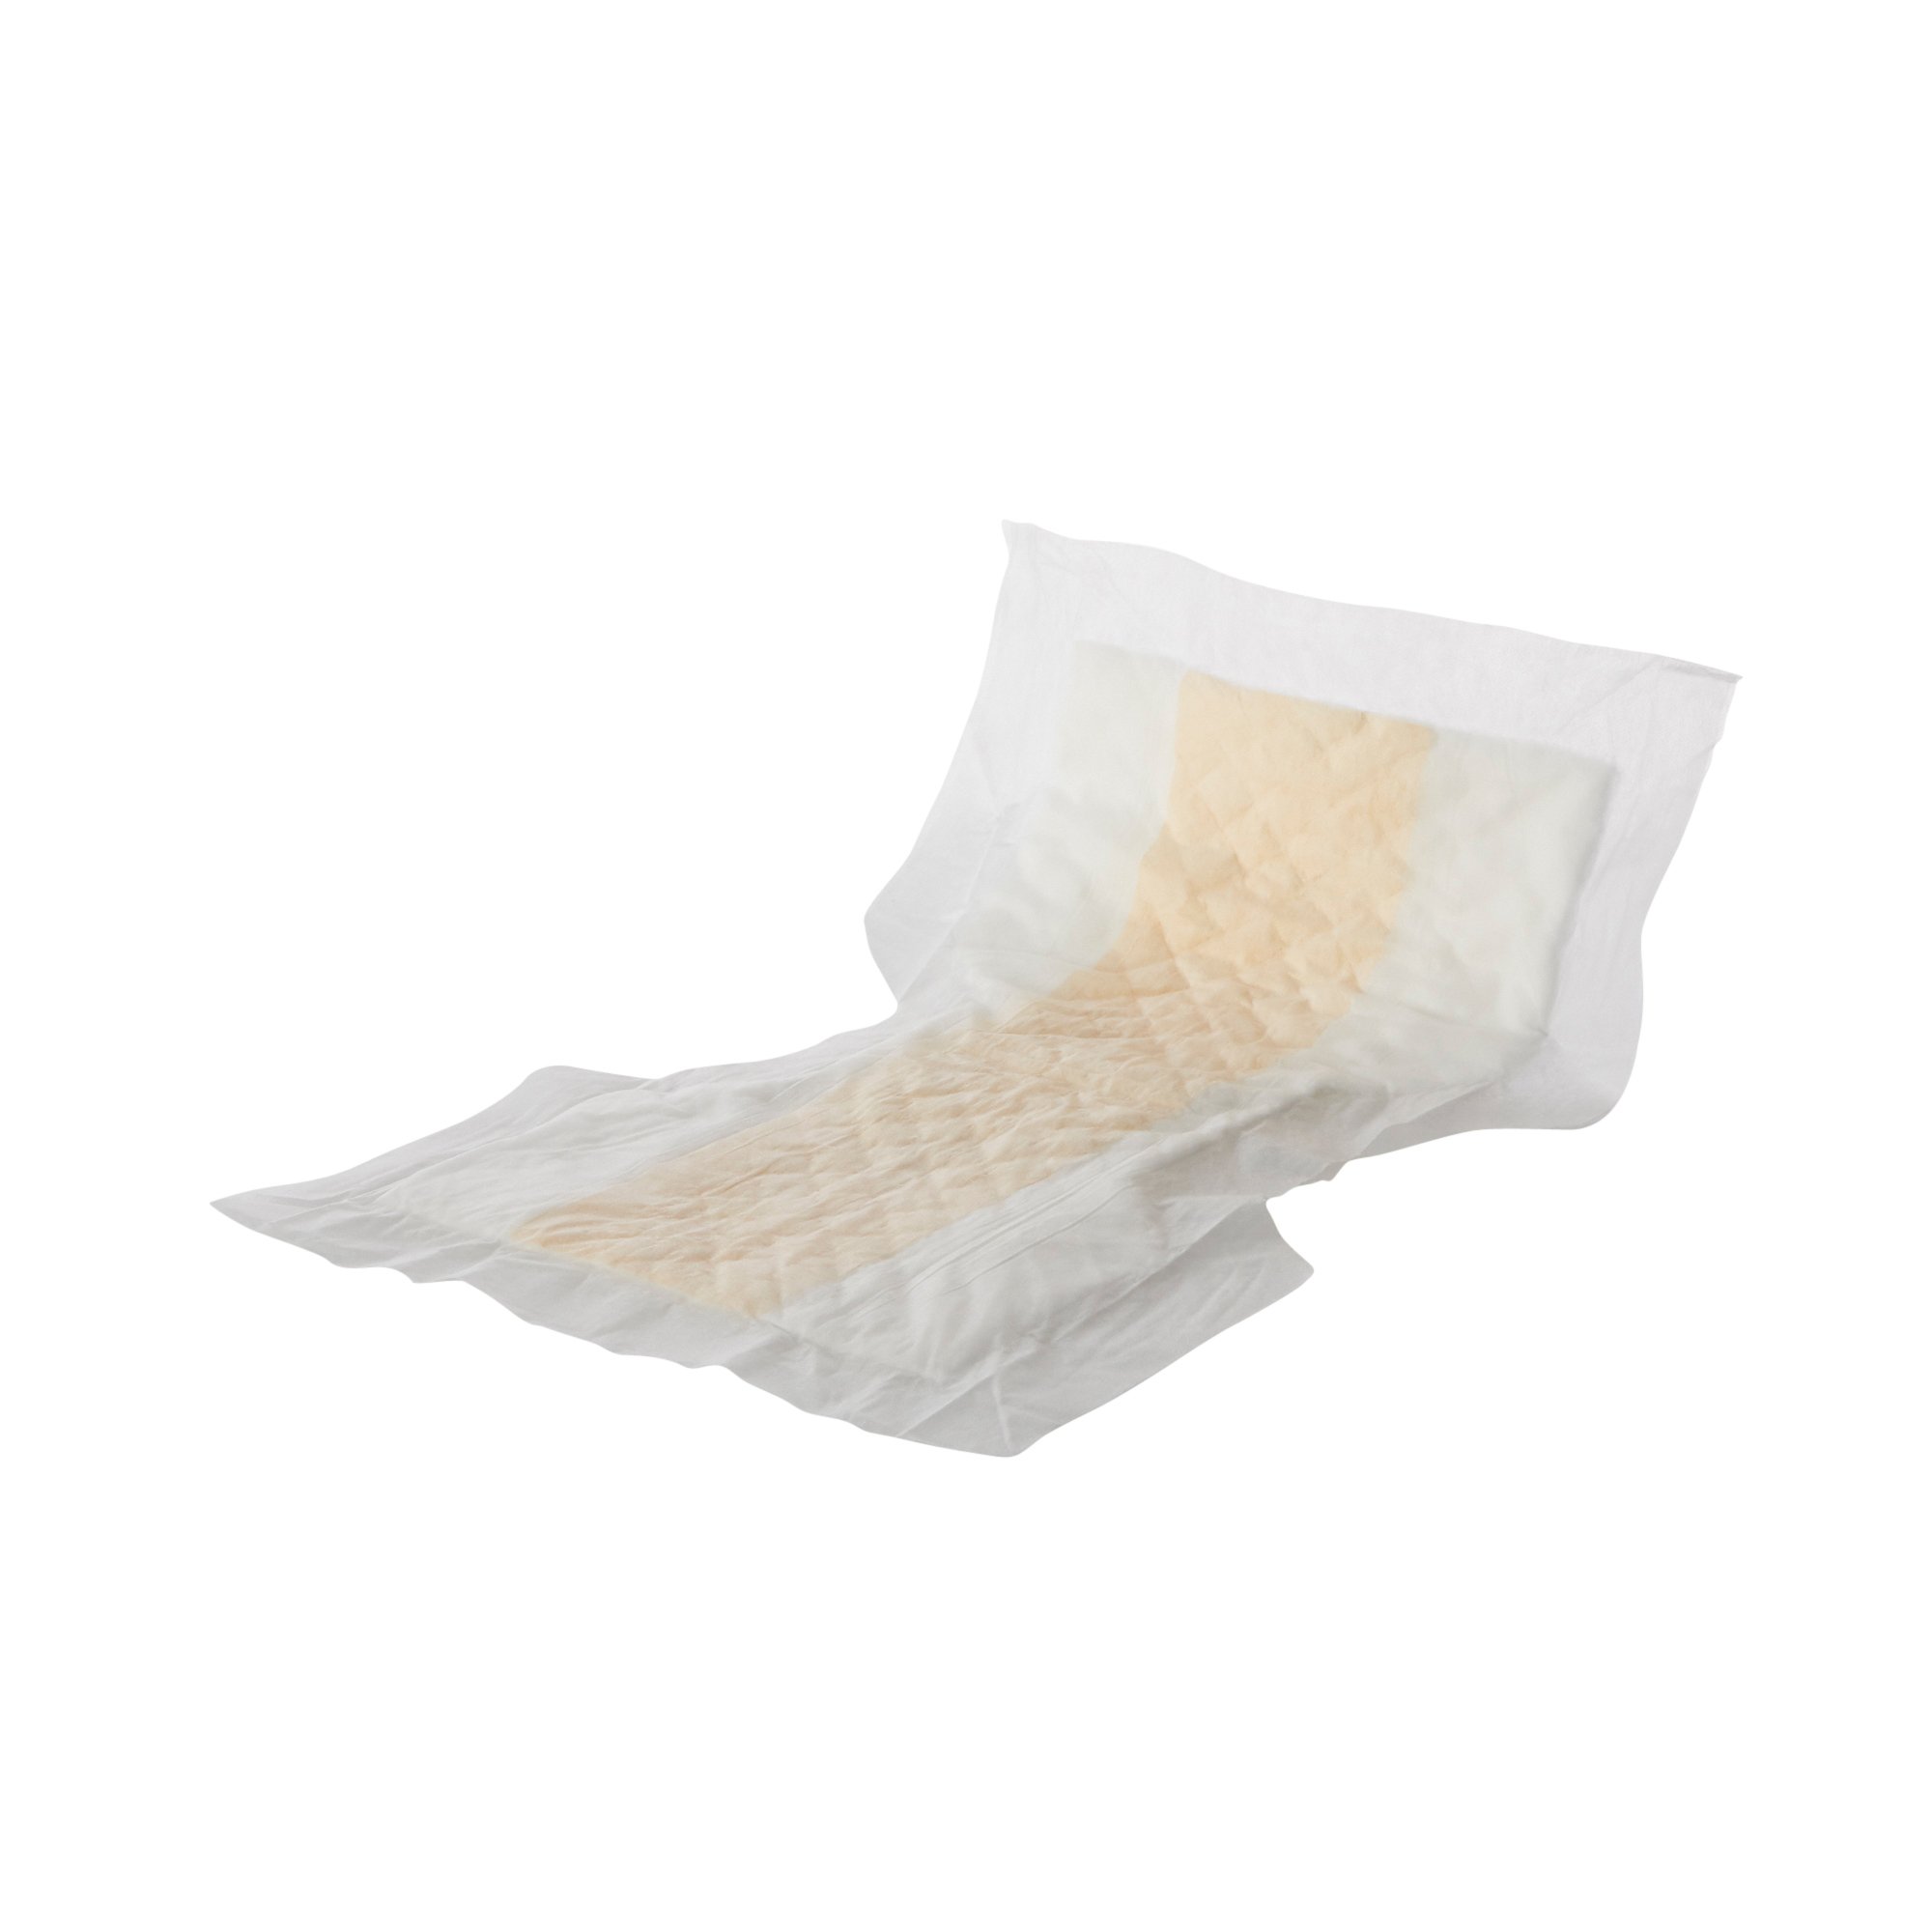 Tranquility® Top Liner® Added Absorbency Incontinence Booster Pad, 13½ x 21½ Inch